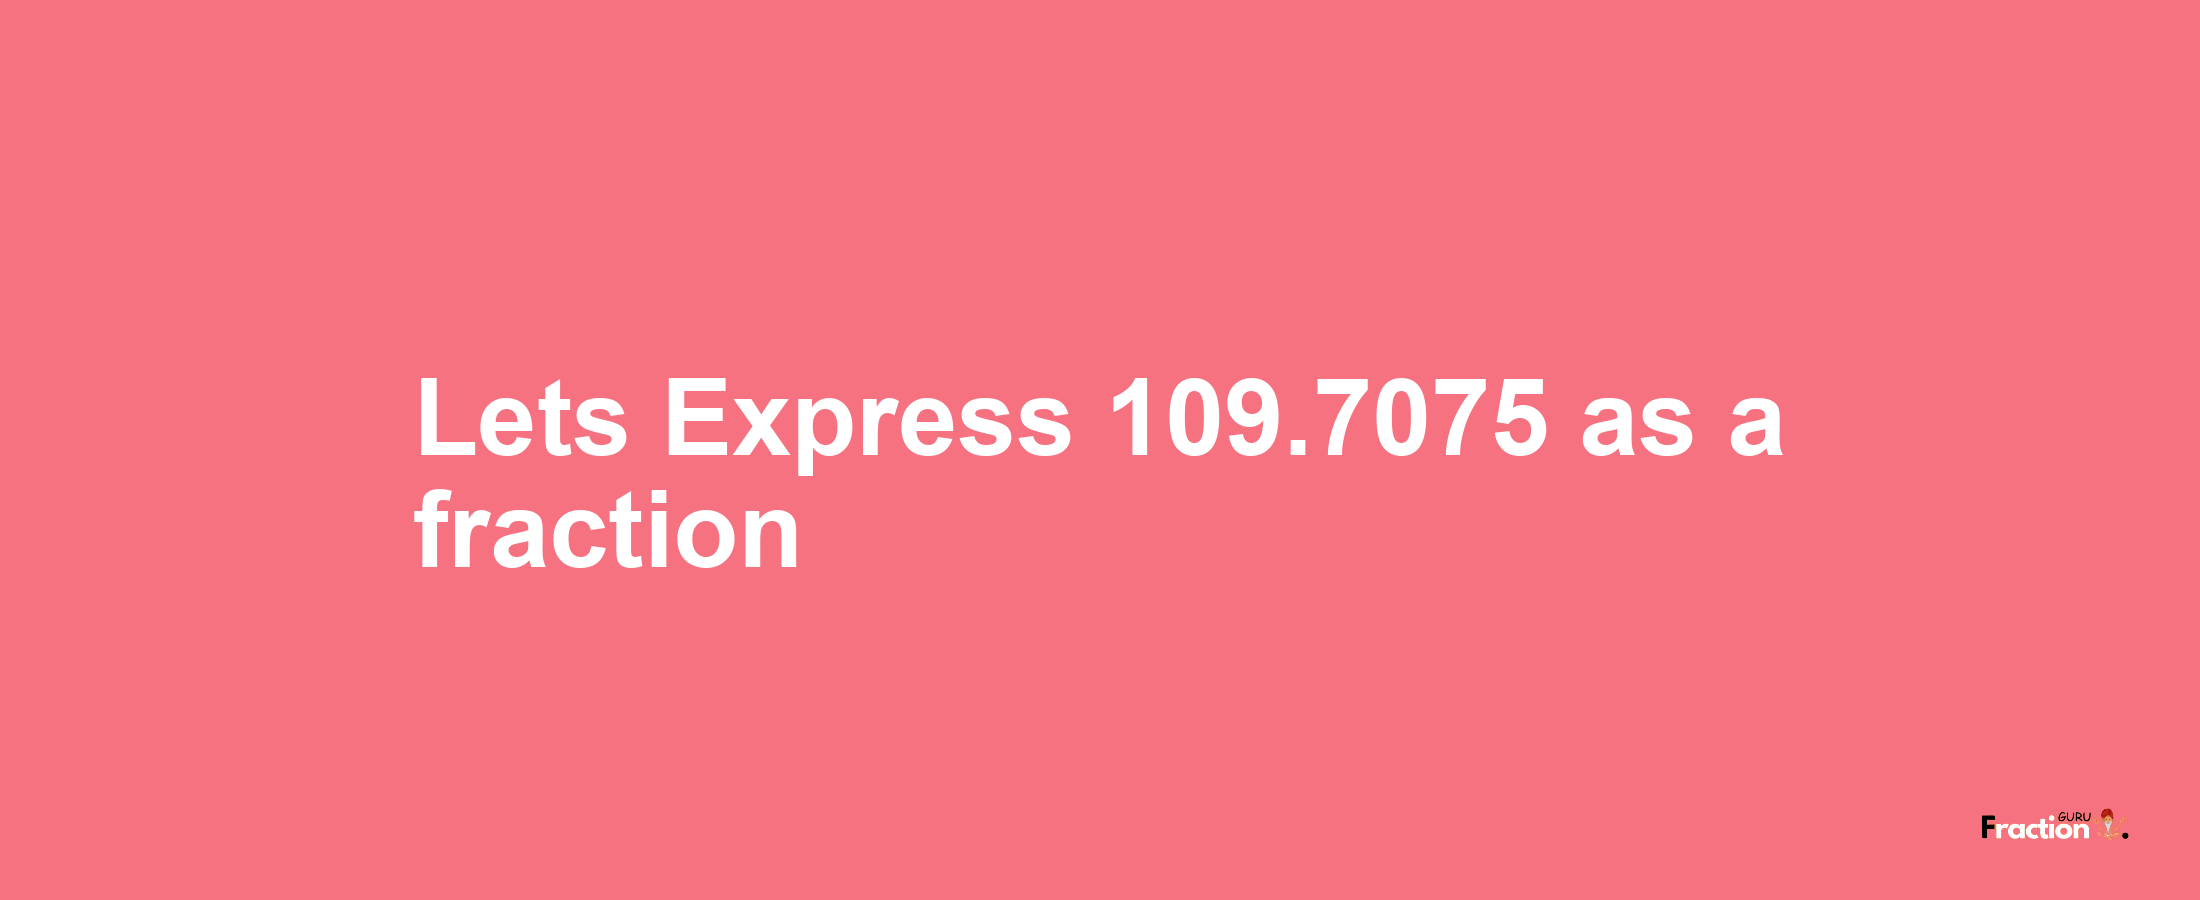 Lets Express 109.7075 as afraction